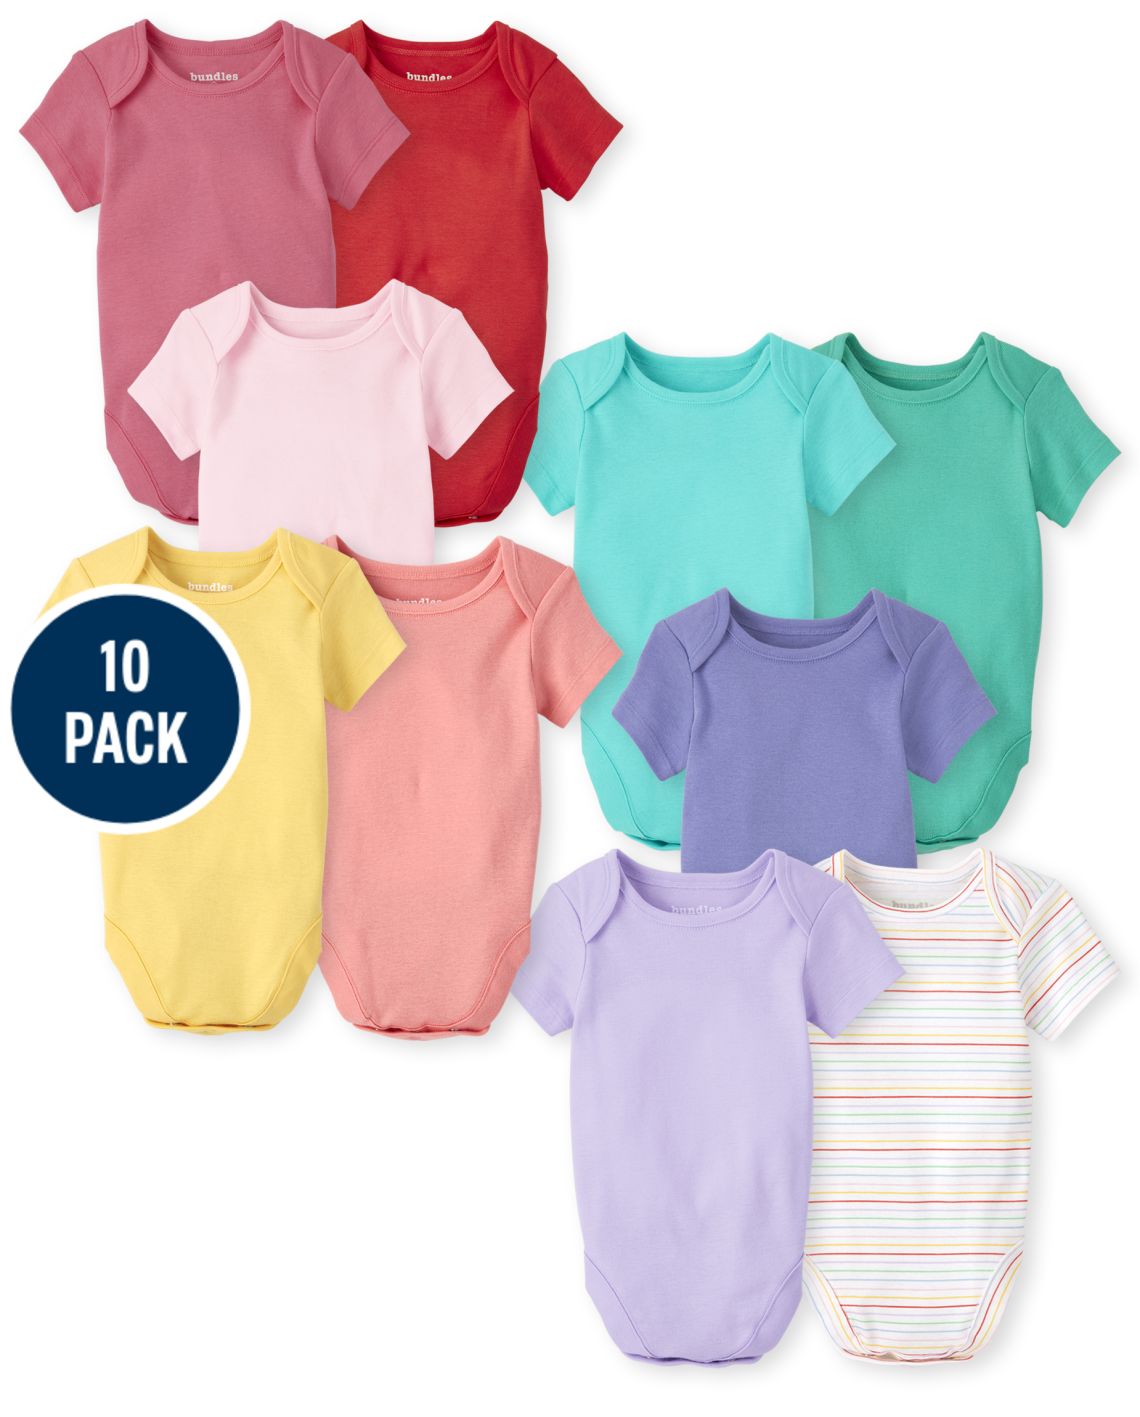 10-Pack The Children's Place Baby Girls Rainbow Bodysuit (Multi Colors)